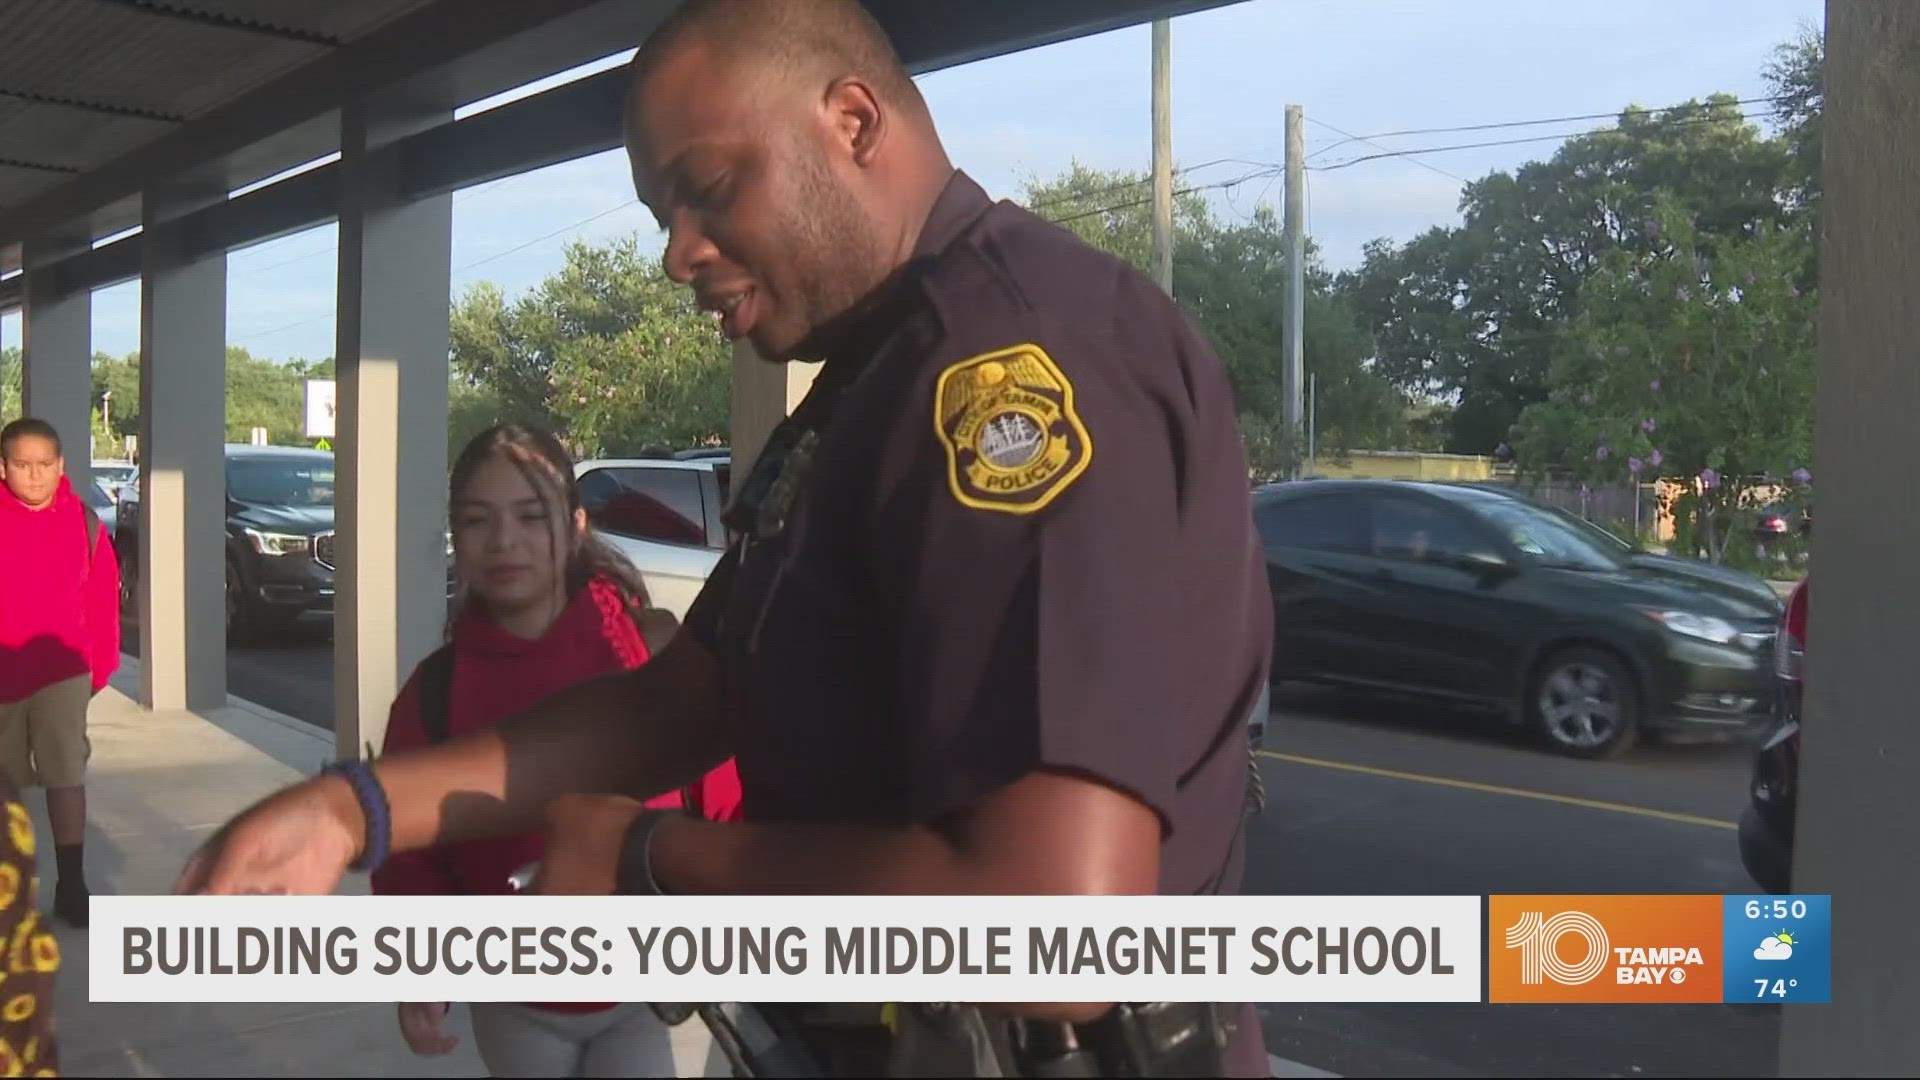 Officer Rodney Riviere connects with students and staff as this magnet school helps students along the path to success.